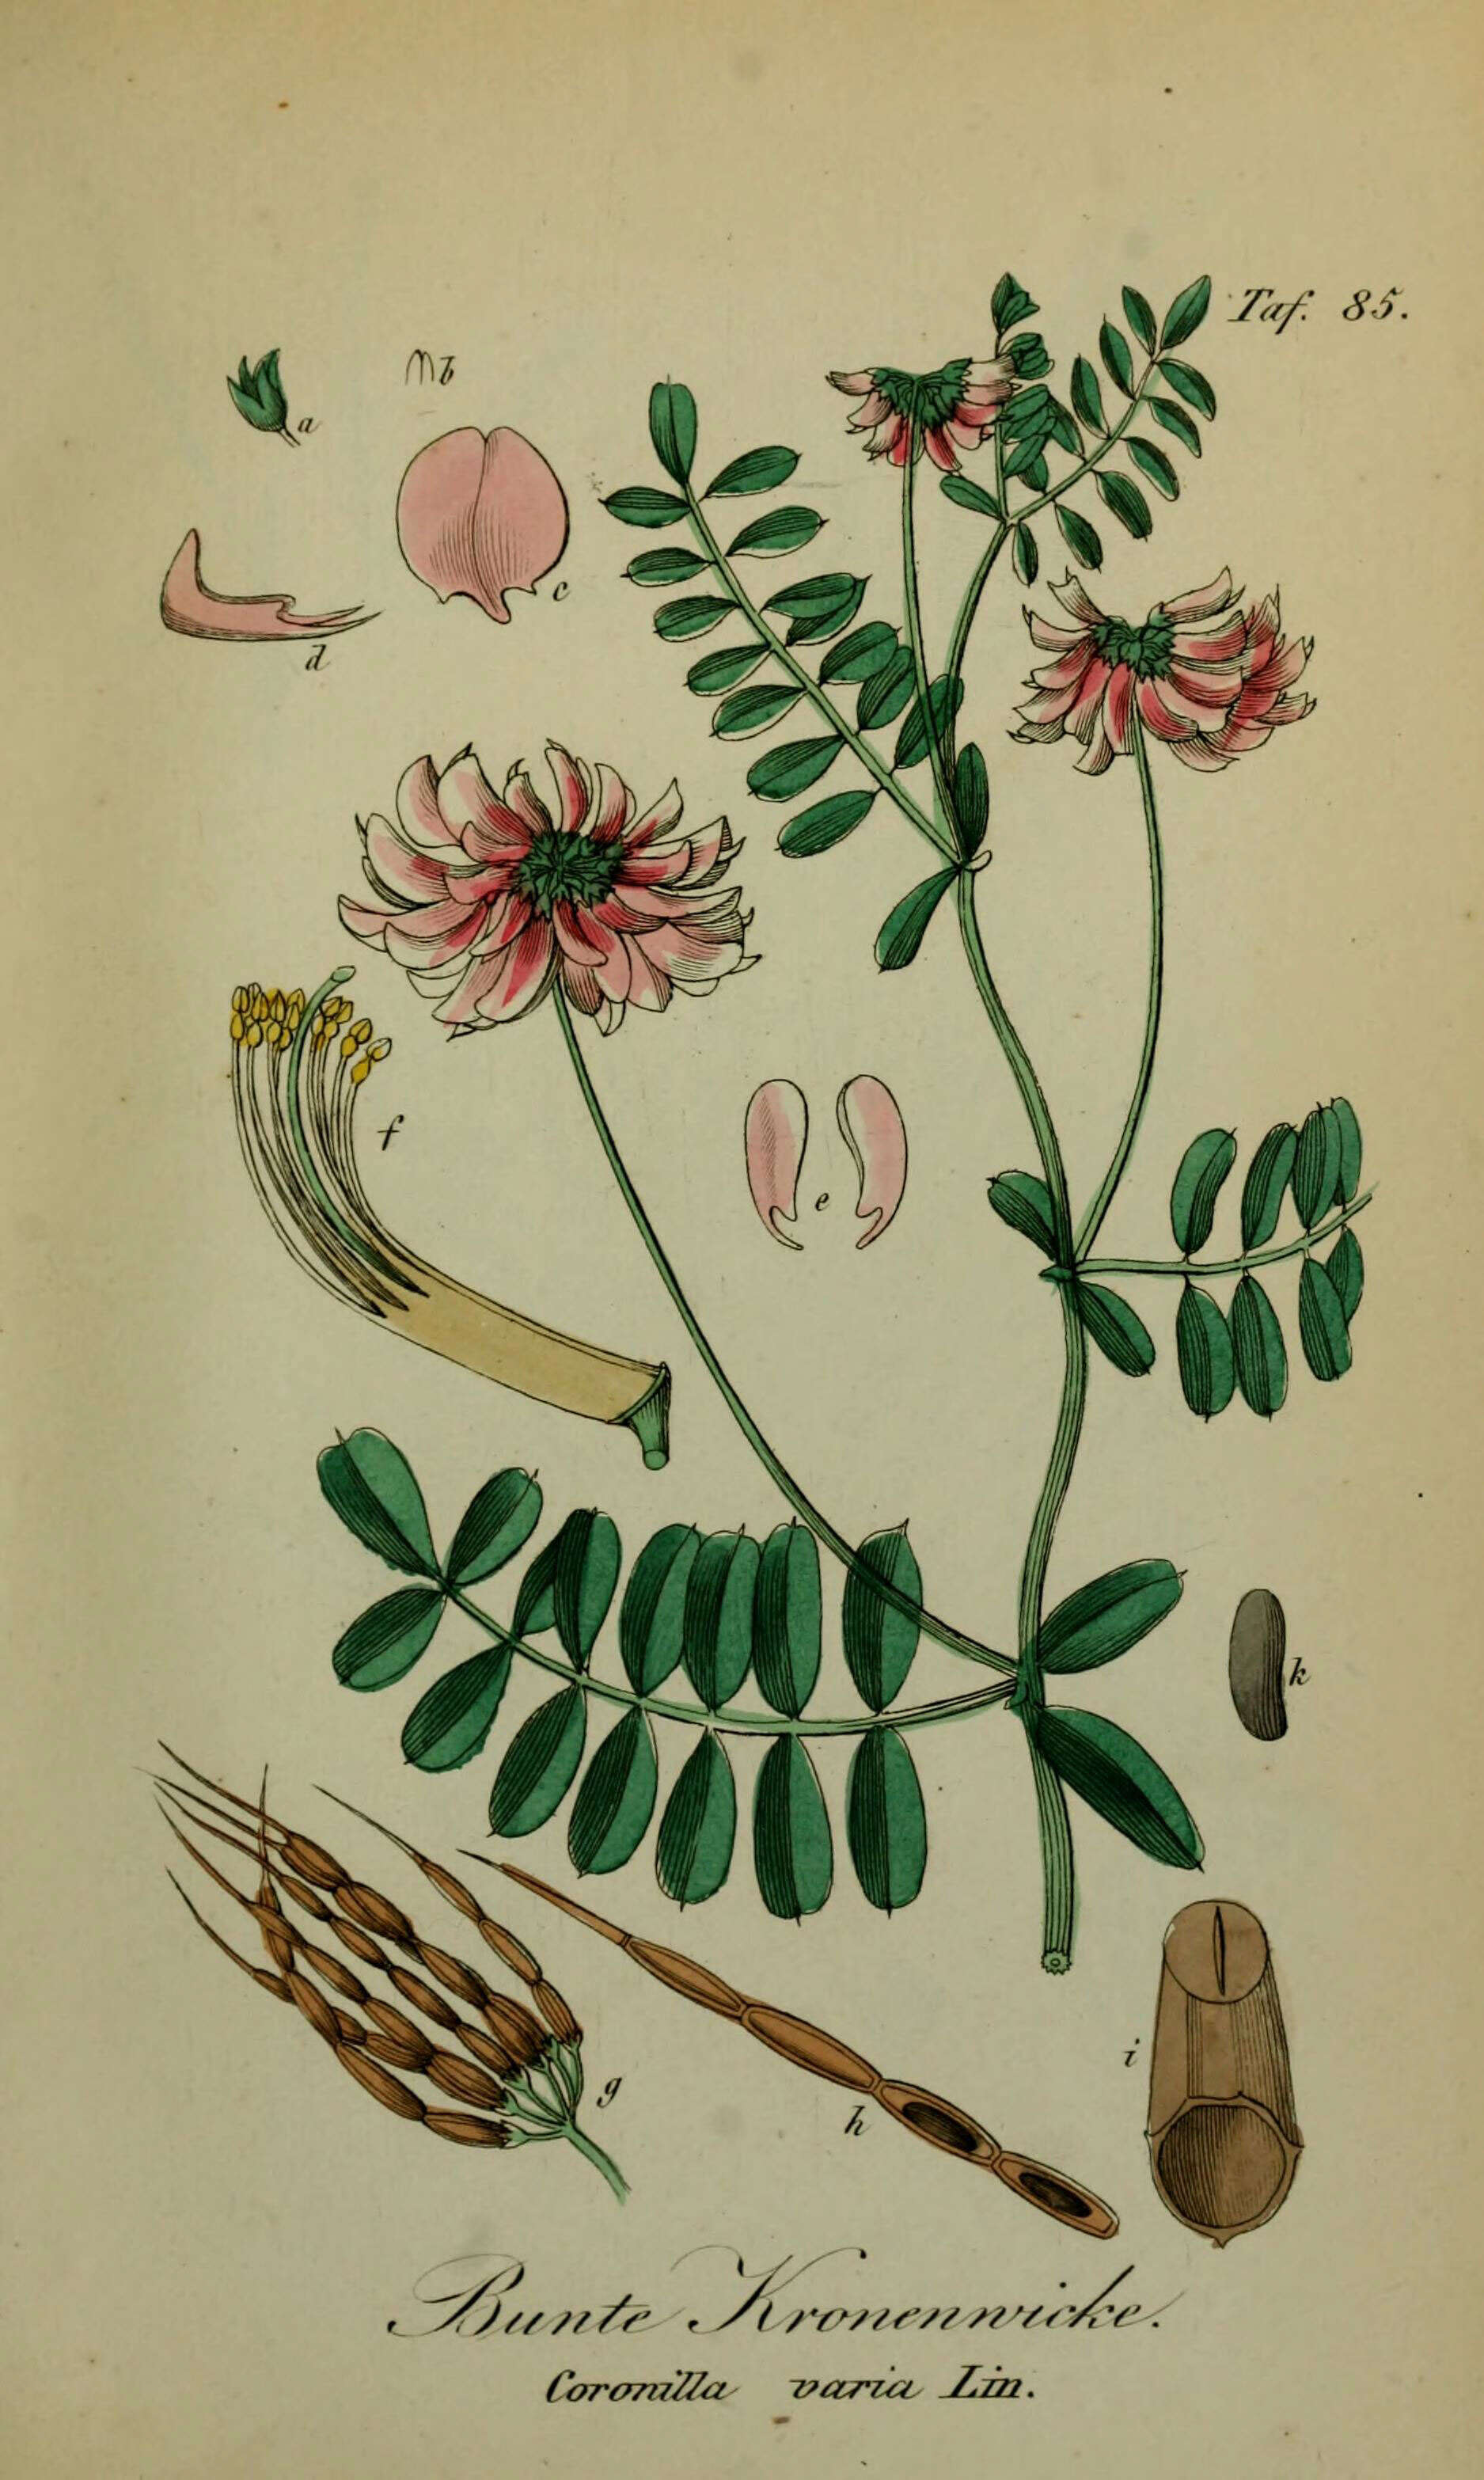 Image of crown vetch